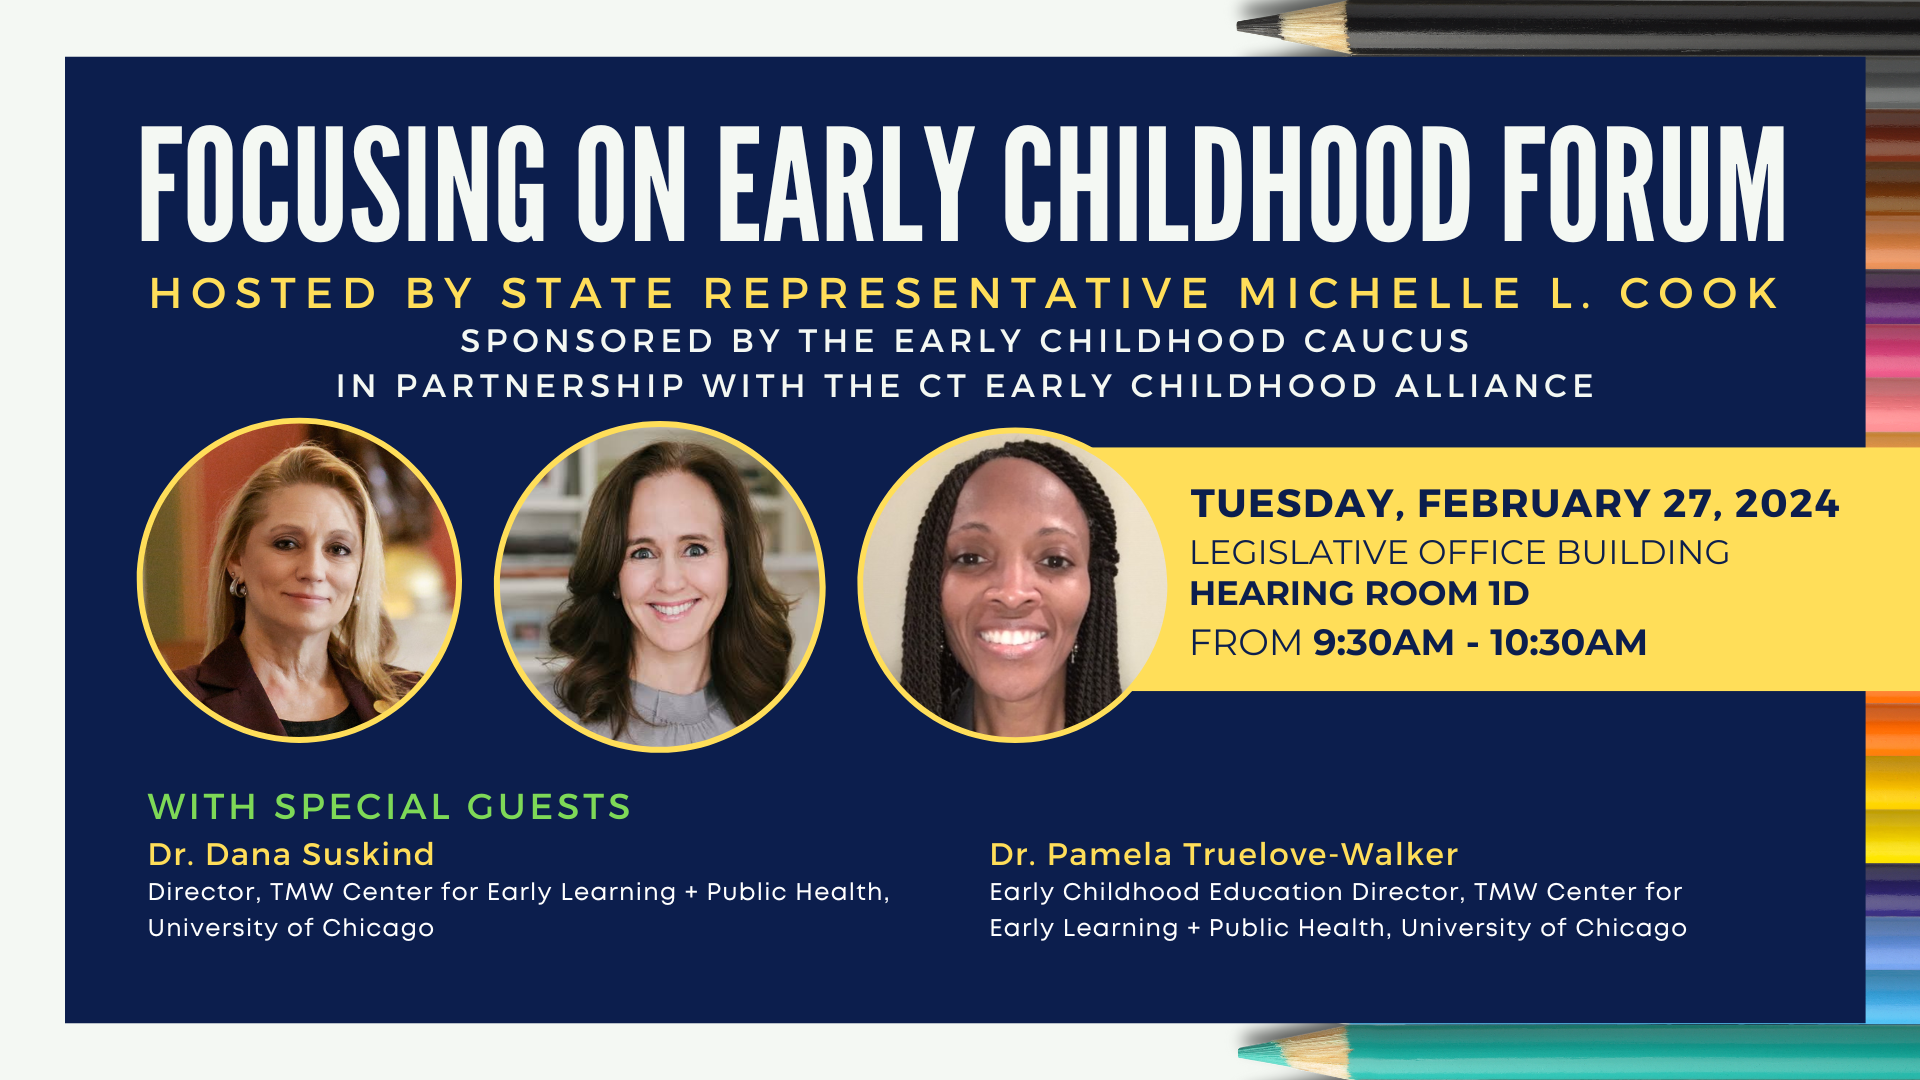 Focusing on Early Childhood Forum, February 27.